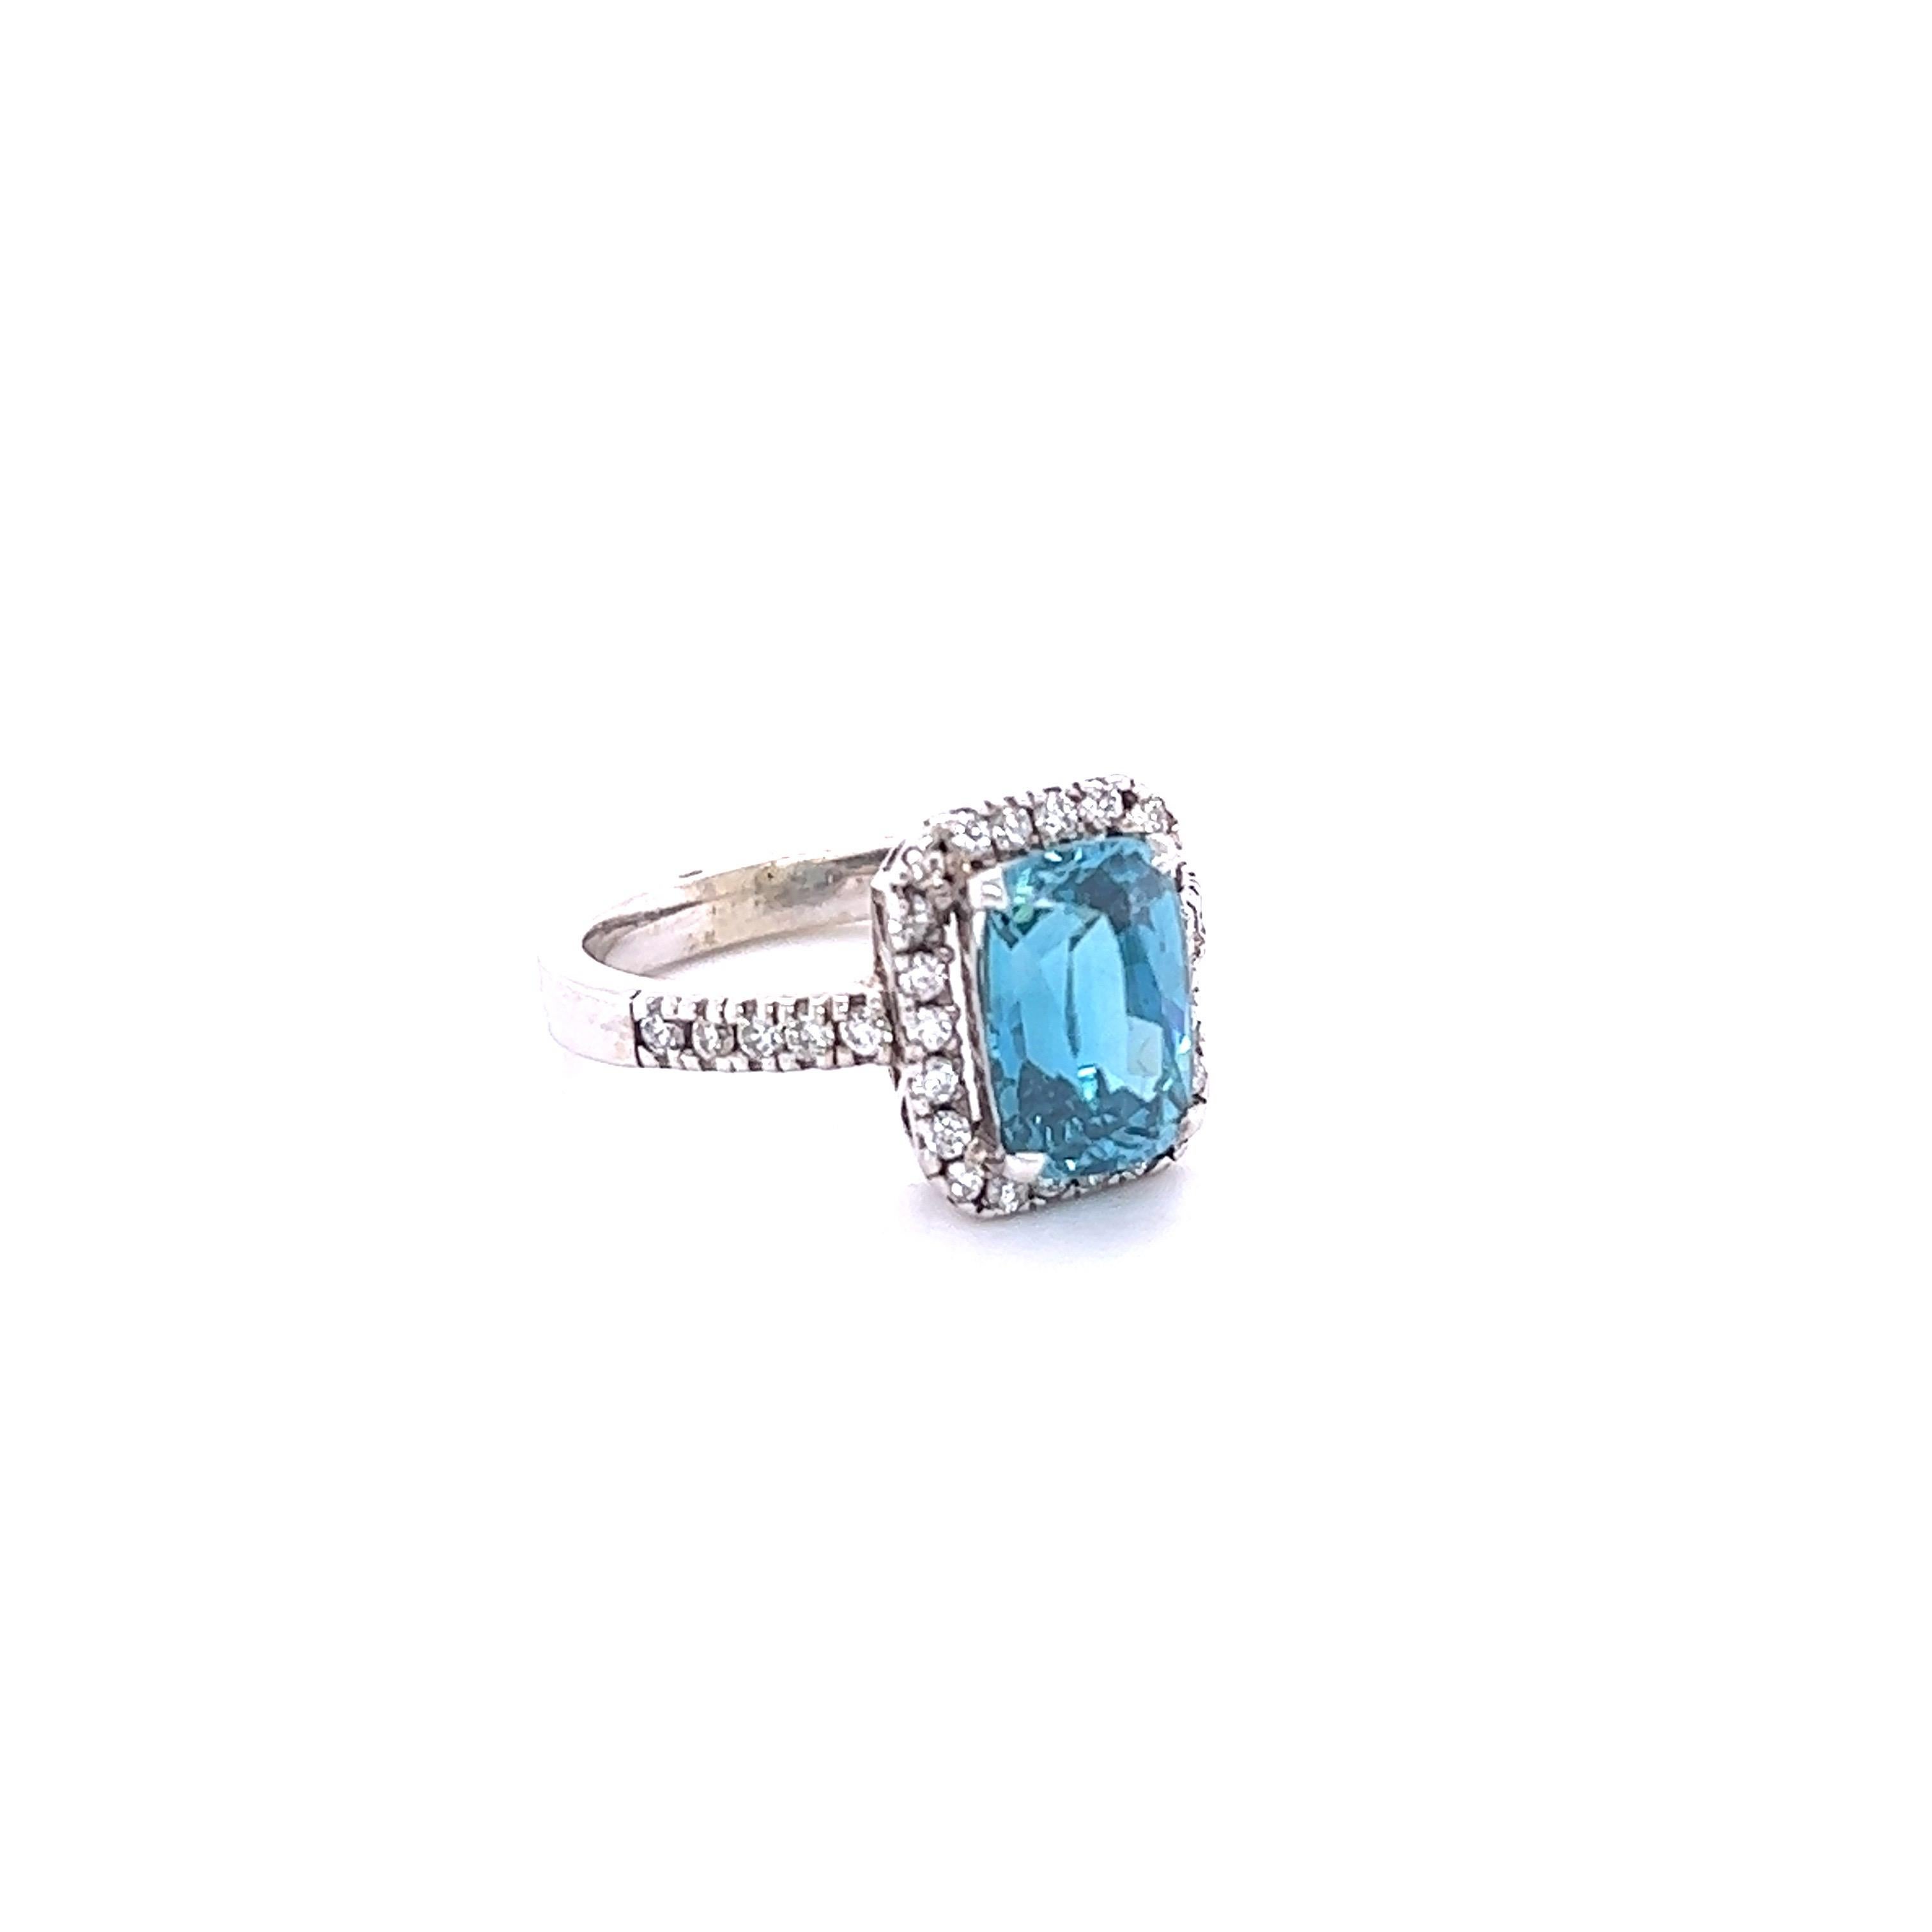 Blue Zircon is a natural stone mined mainly in Sri Lanka, Myanmar, and Australia.  
This ring has a Emerald-Oval Cut Blue Zircon that weighs 4.66 carats and is surrounded by 32 Round Cut Diamonds that weigh 0.43 Carats. The total carat weight of the